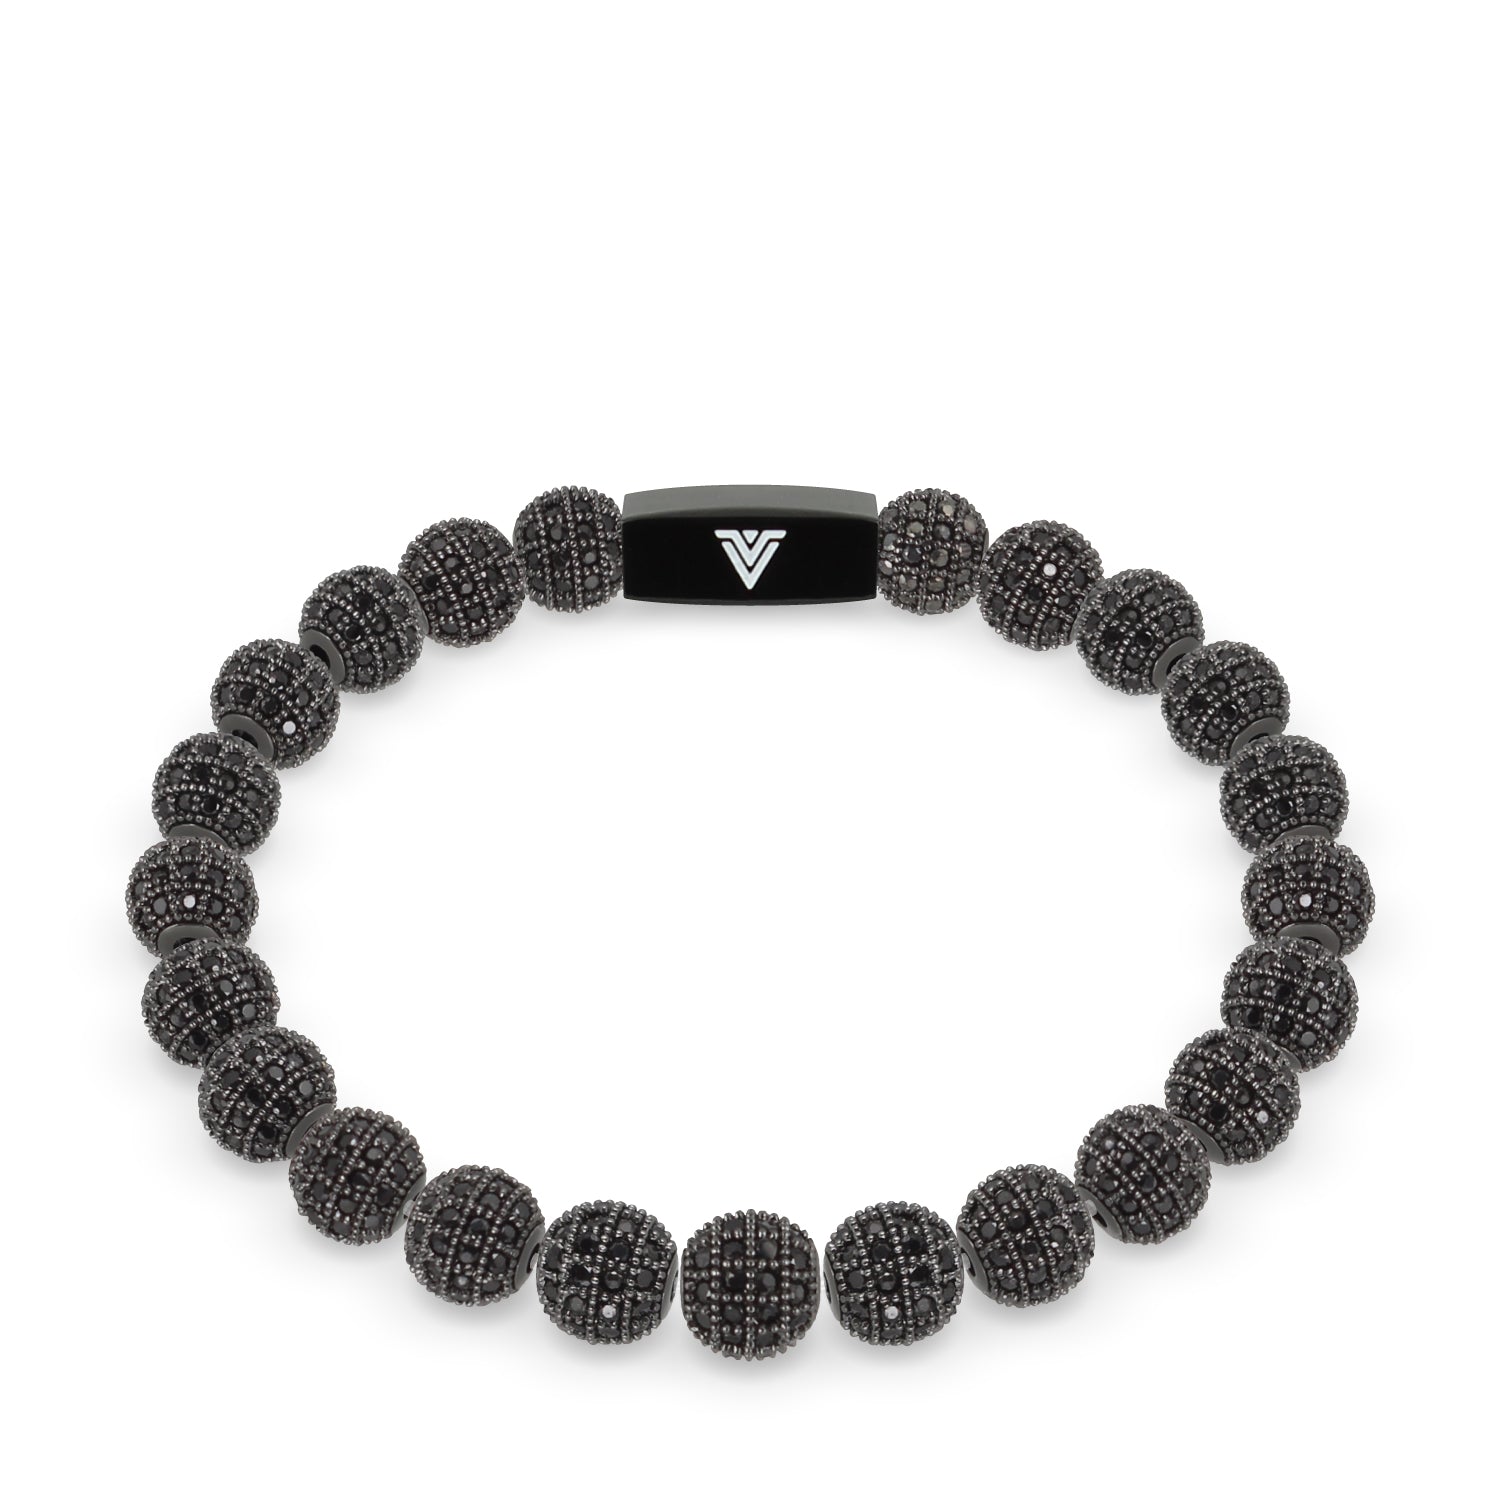 Front view of an 8mm Black Pave crystal beaded stretch bracelet with black stainless steel logo bead made by Voltlin